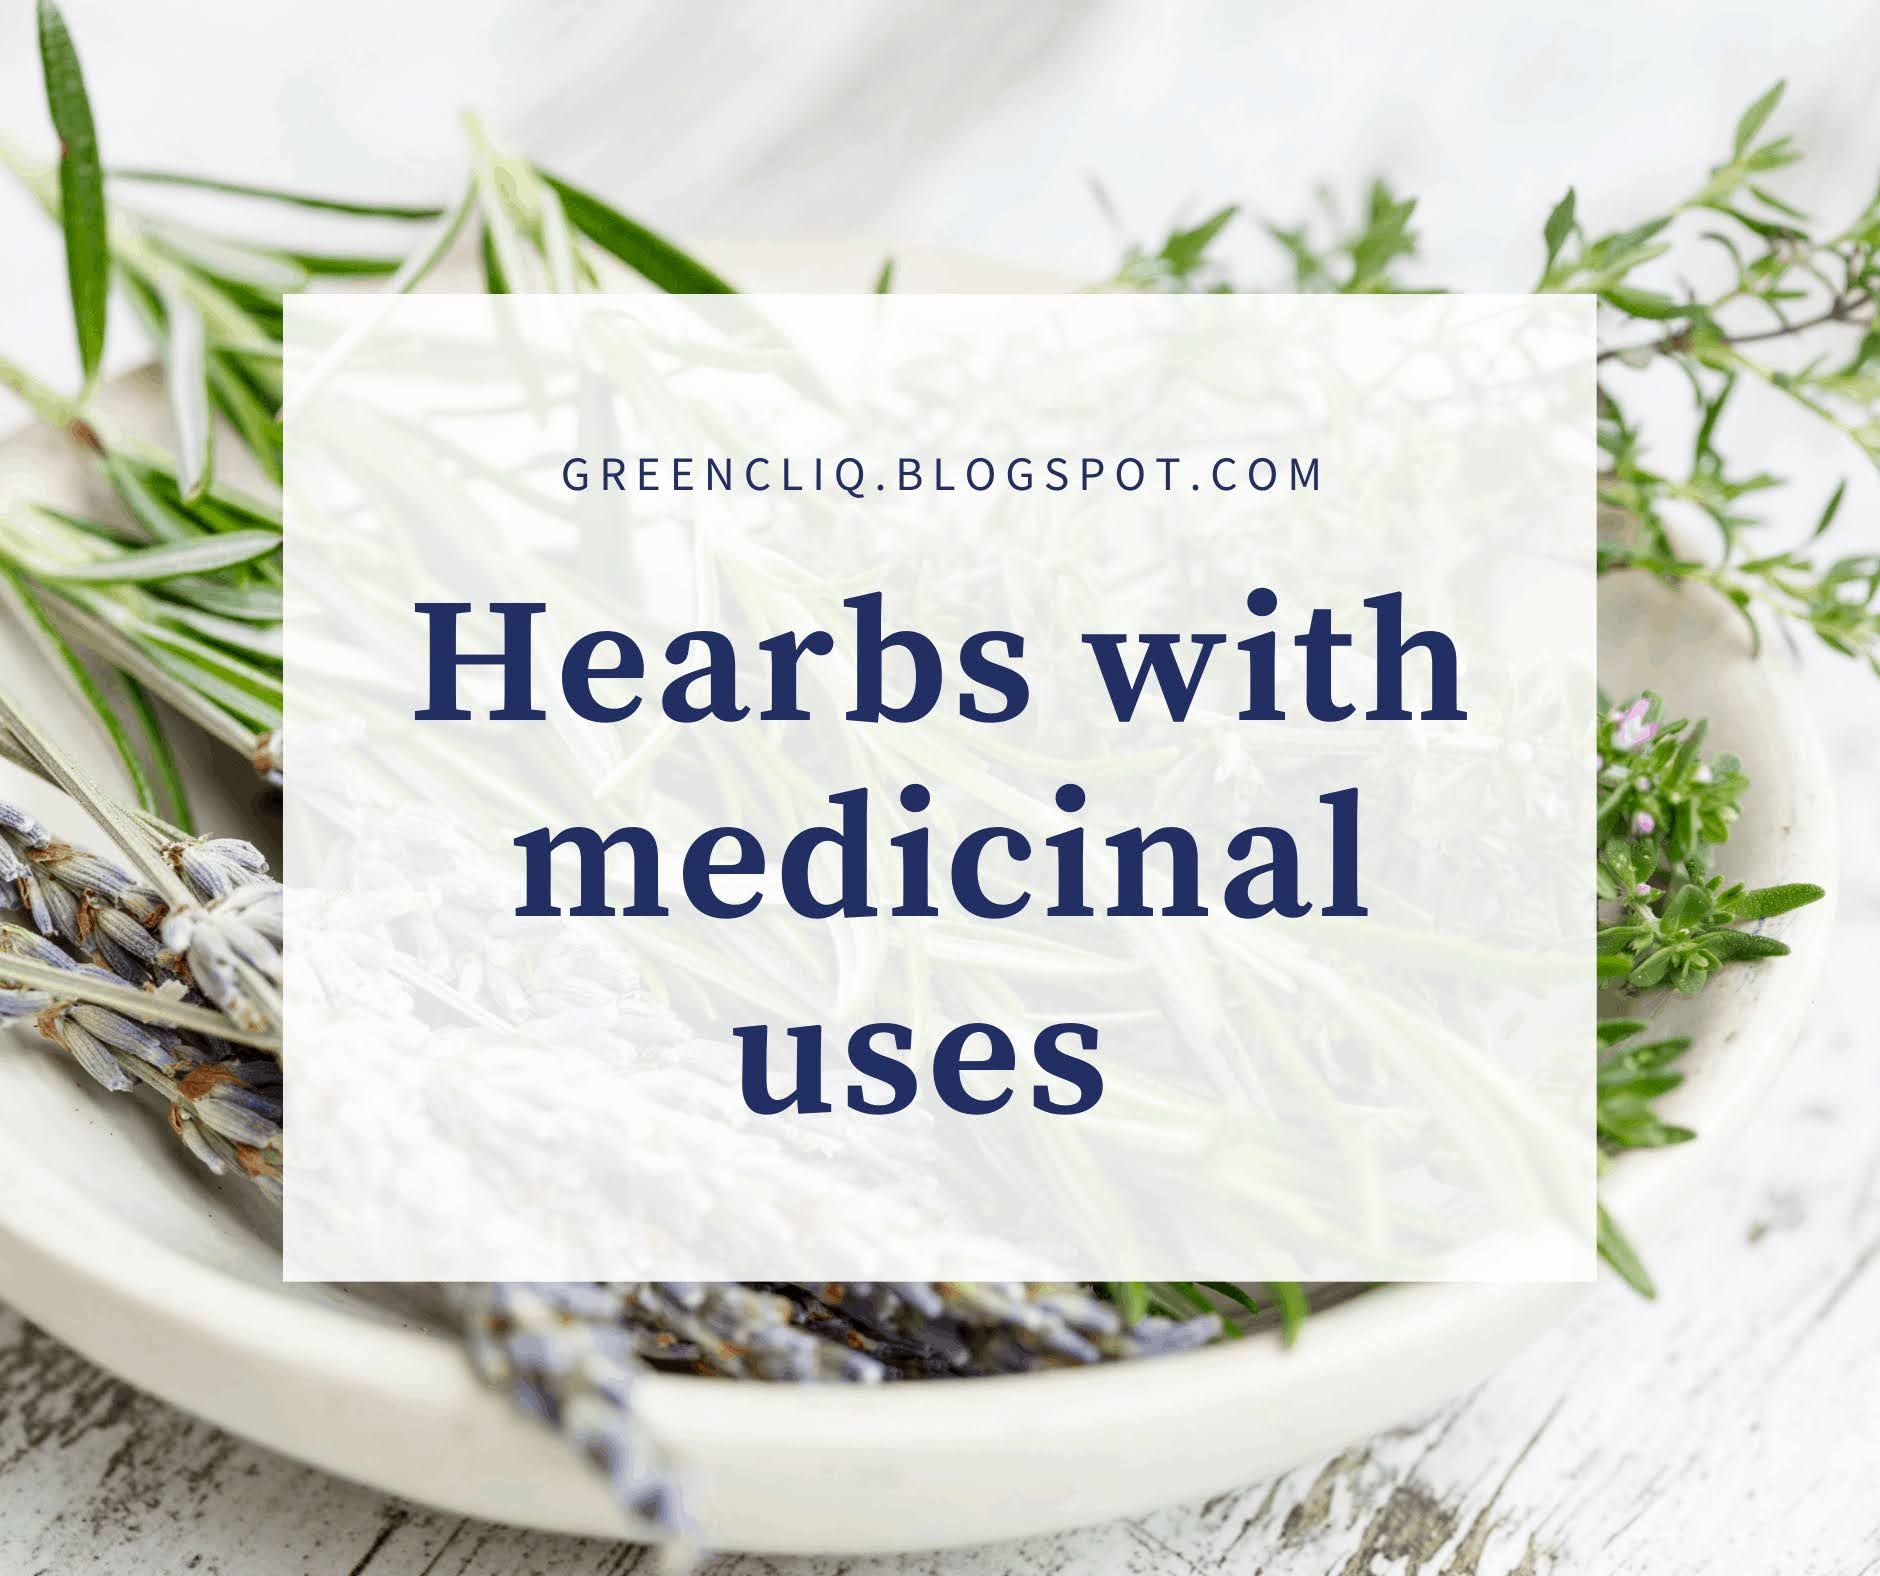 100 COMMON HERBS AND THEIR MEDICINAL USES